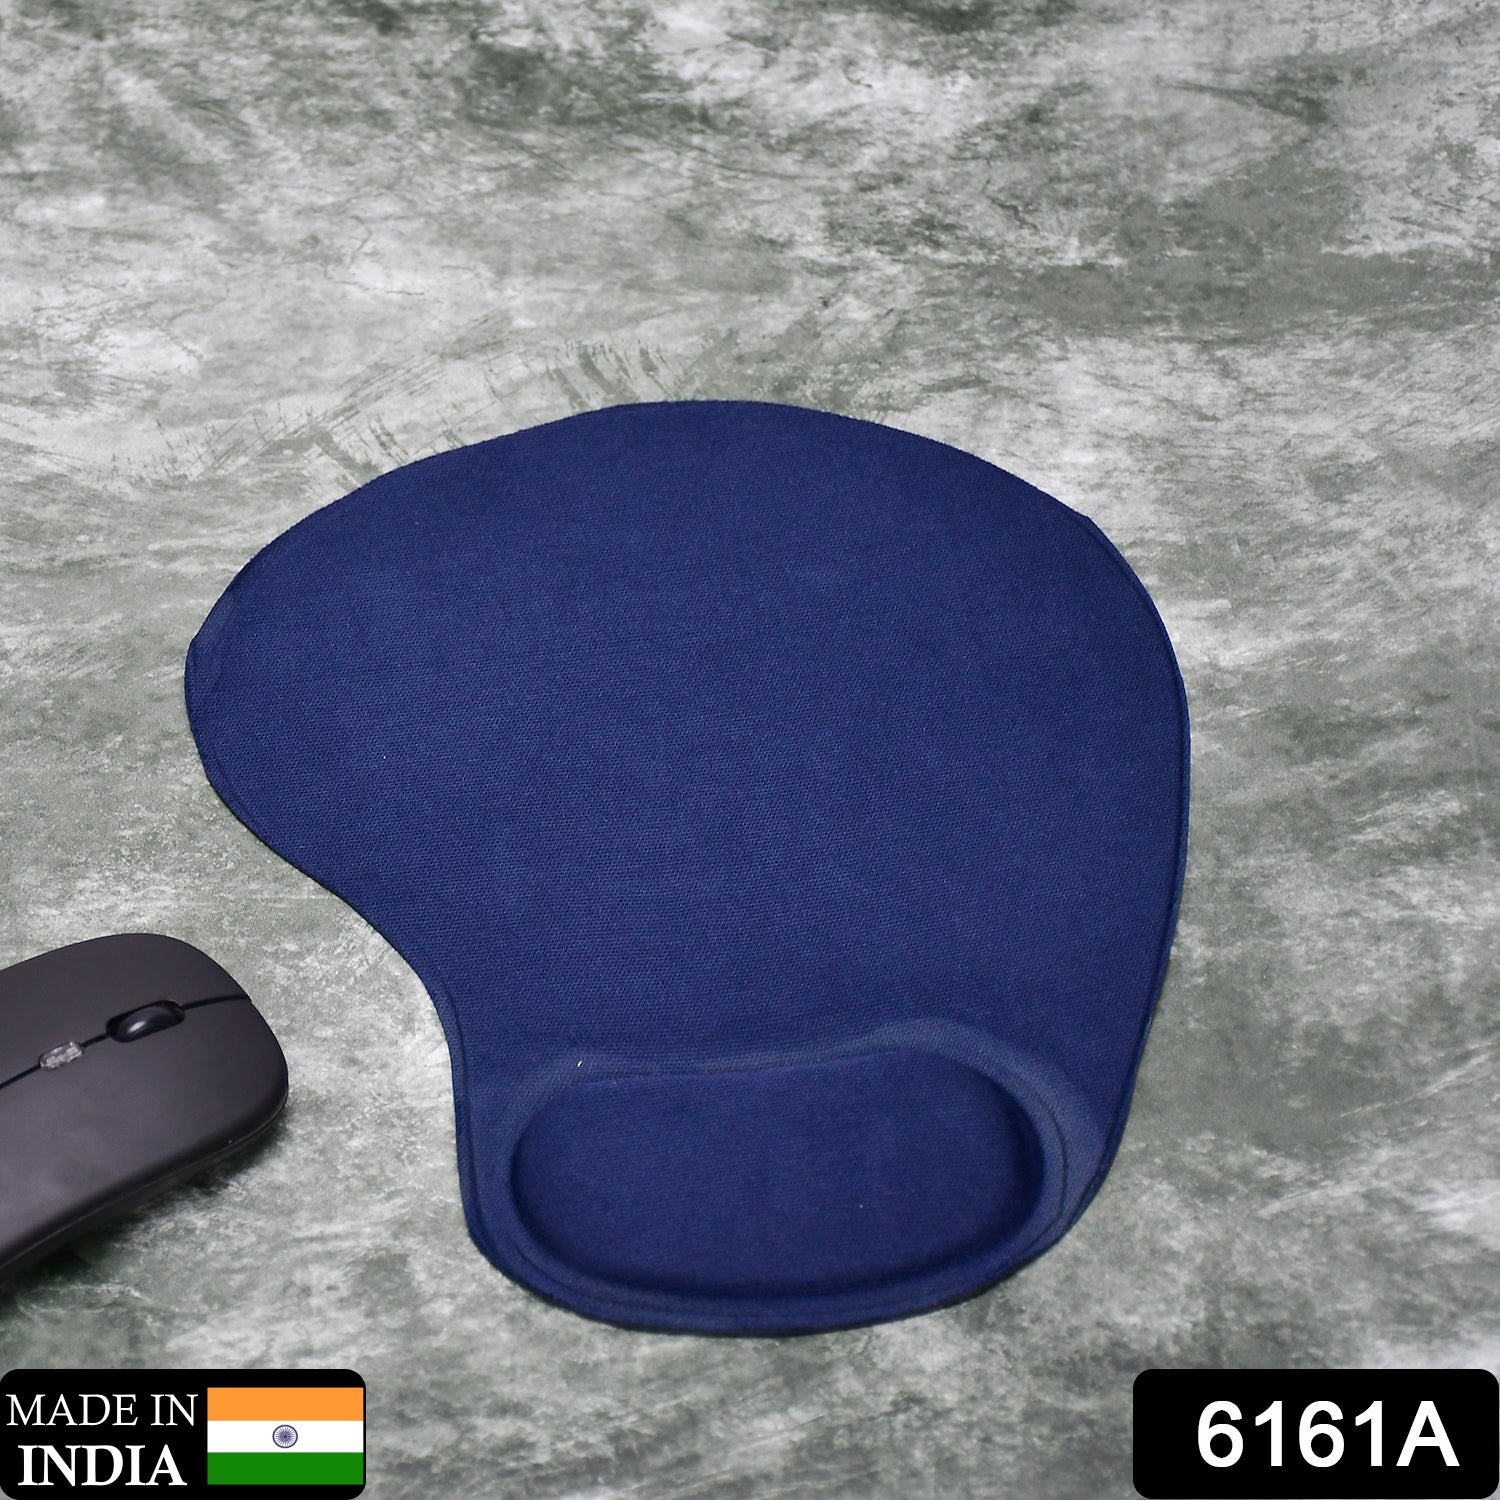 6161A WRIST S MOUSE PAD USED FOR MOUSE WHILE USING COMPUTER. 